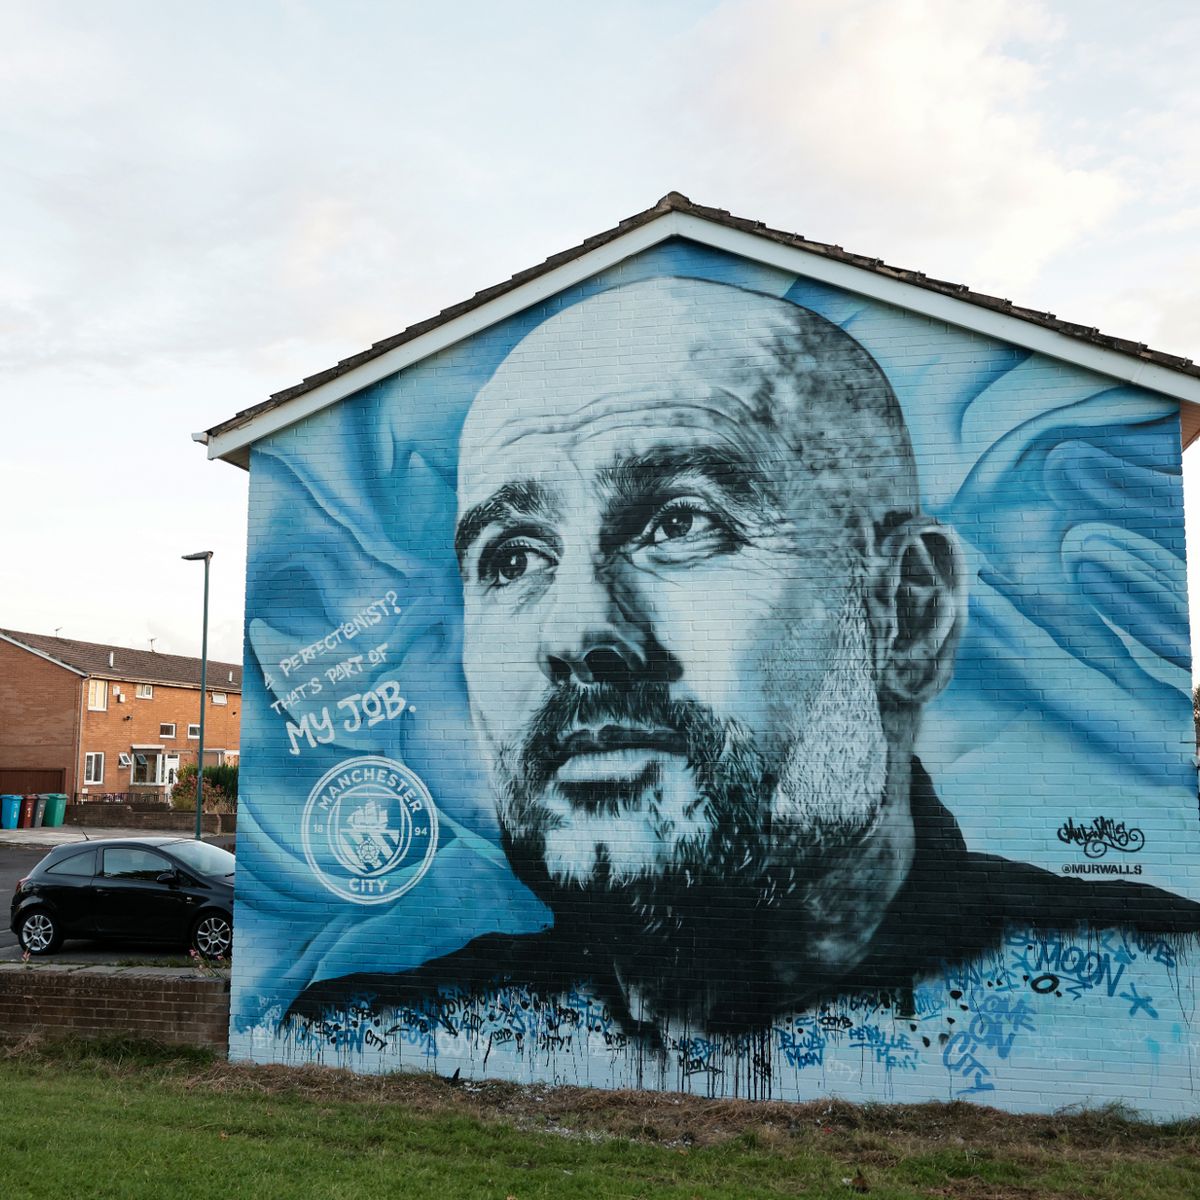 Pep Guardiola mural defaced with 'MUFC' graffiti near the Etihad is cleaned up - Manchester Evening News